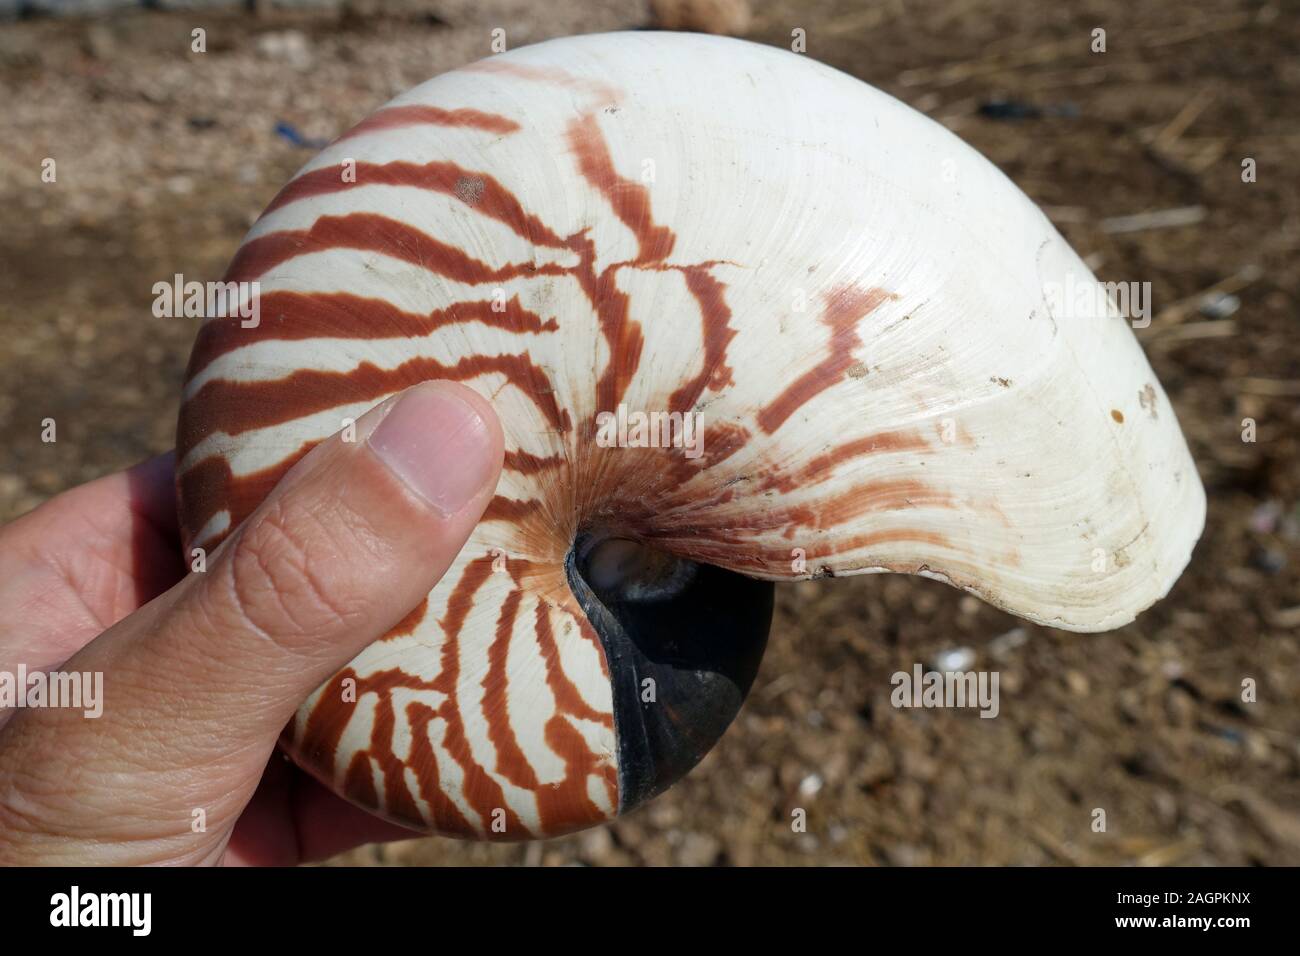 Indonesia Alor - giant tiger nautilus shell in hand Stock Photo